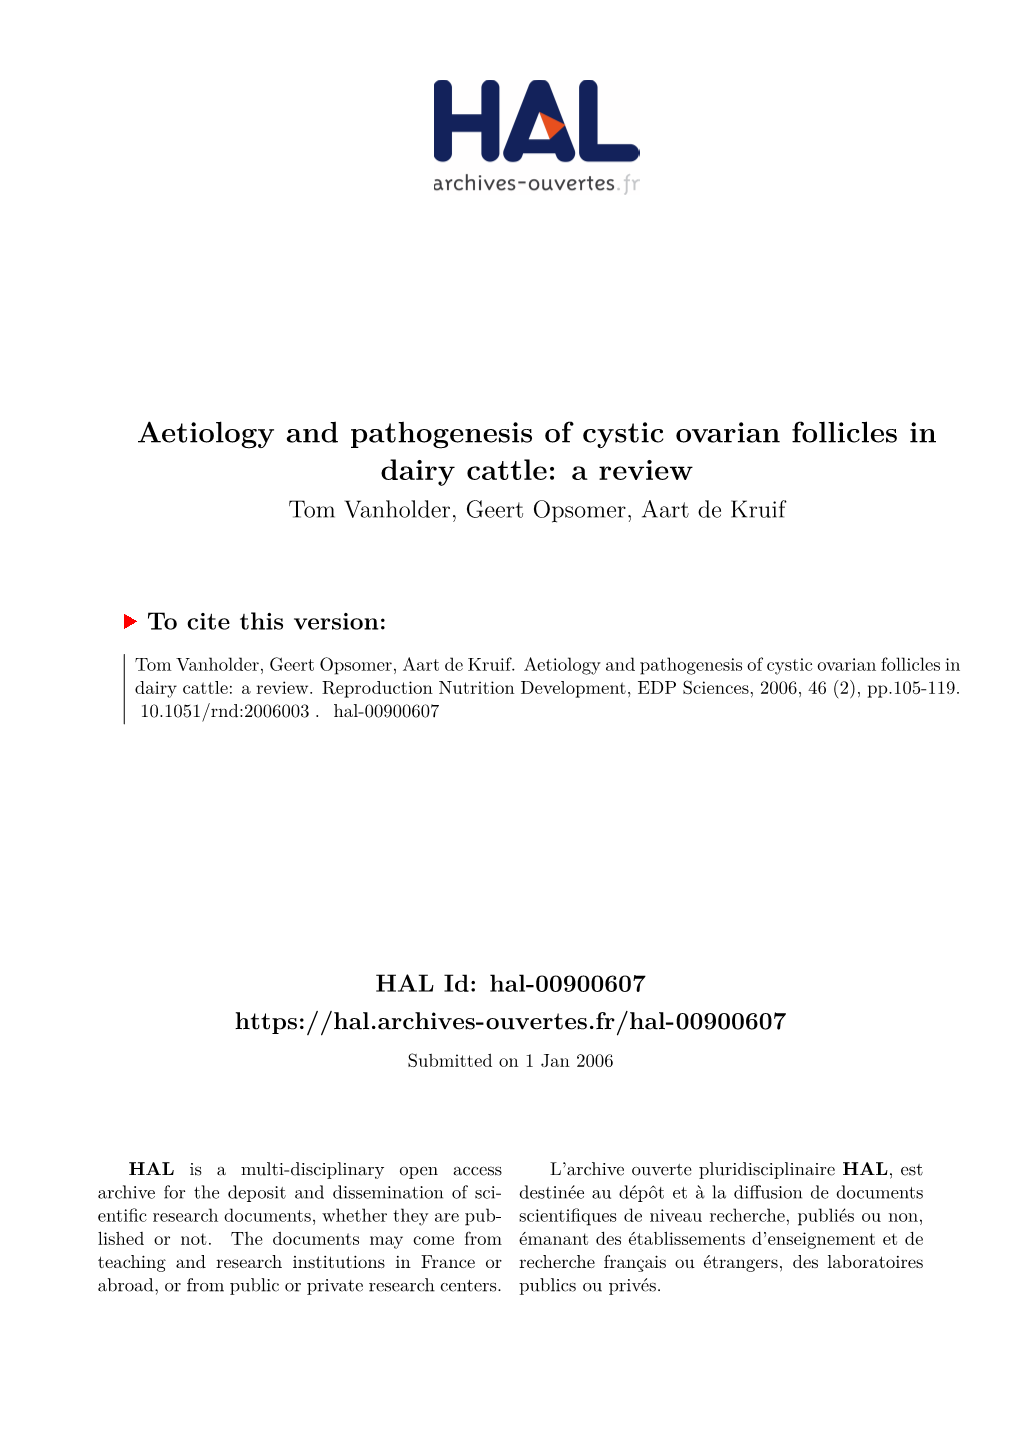 Aetiology and Pathogenesis of Cystic Ovarian Follicles in Dairy Cattle: a Review Tom Vanholder, Geert Opsomer, Aart De Kruif